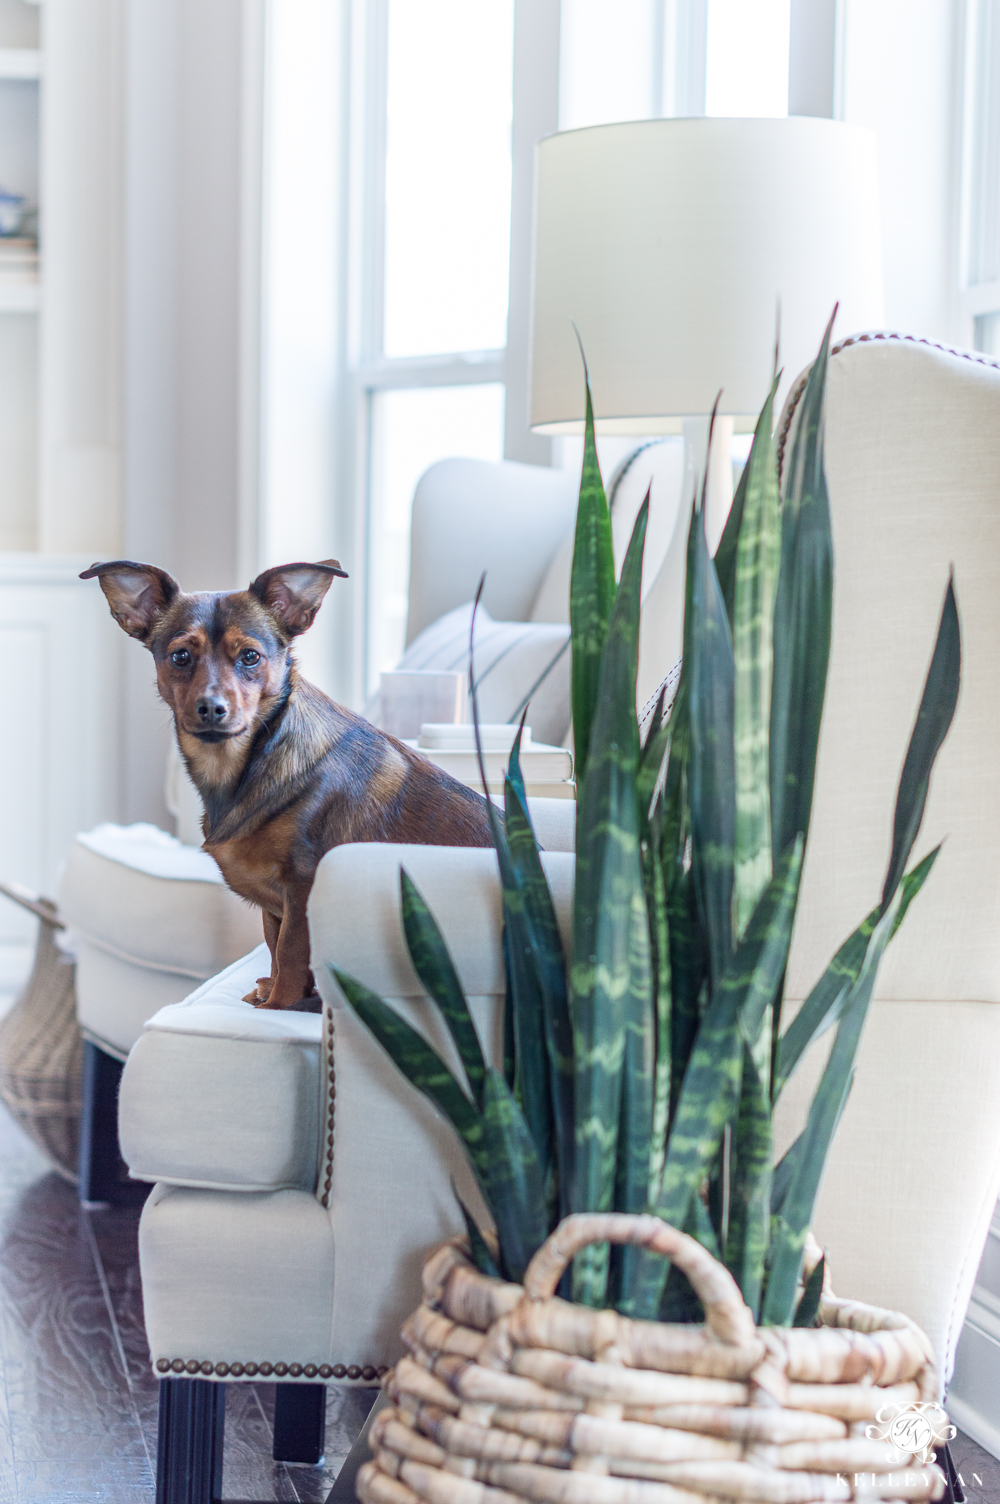 Dog on PotteryBarn Thatcher Wingback Chairs